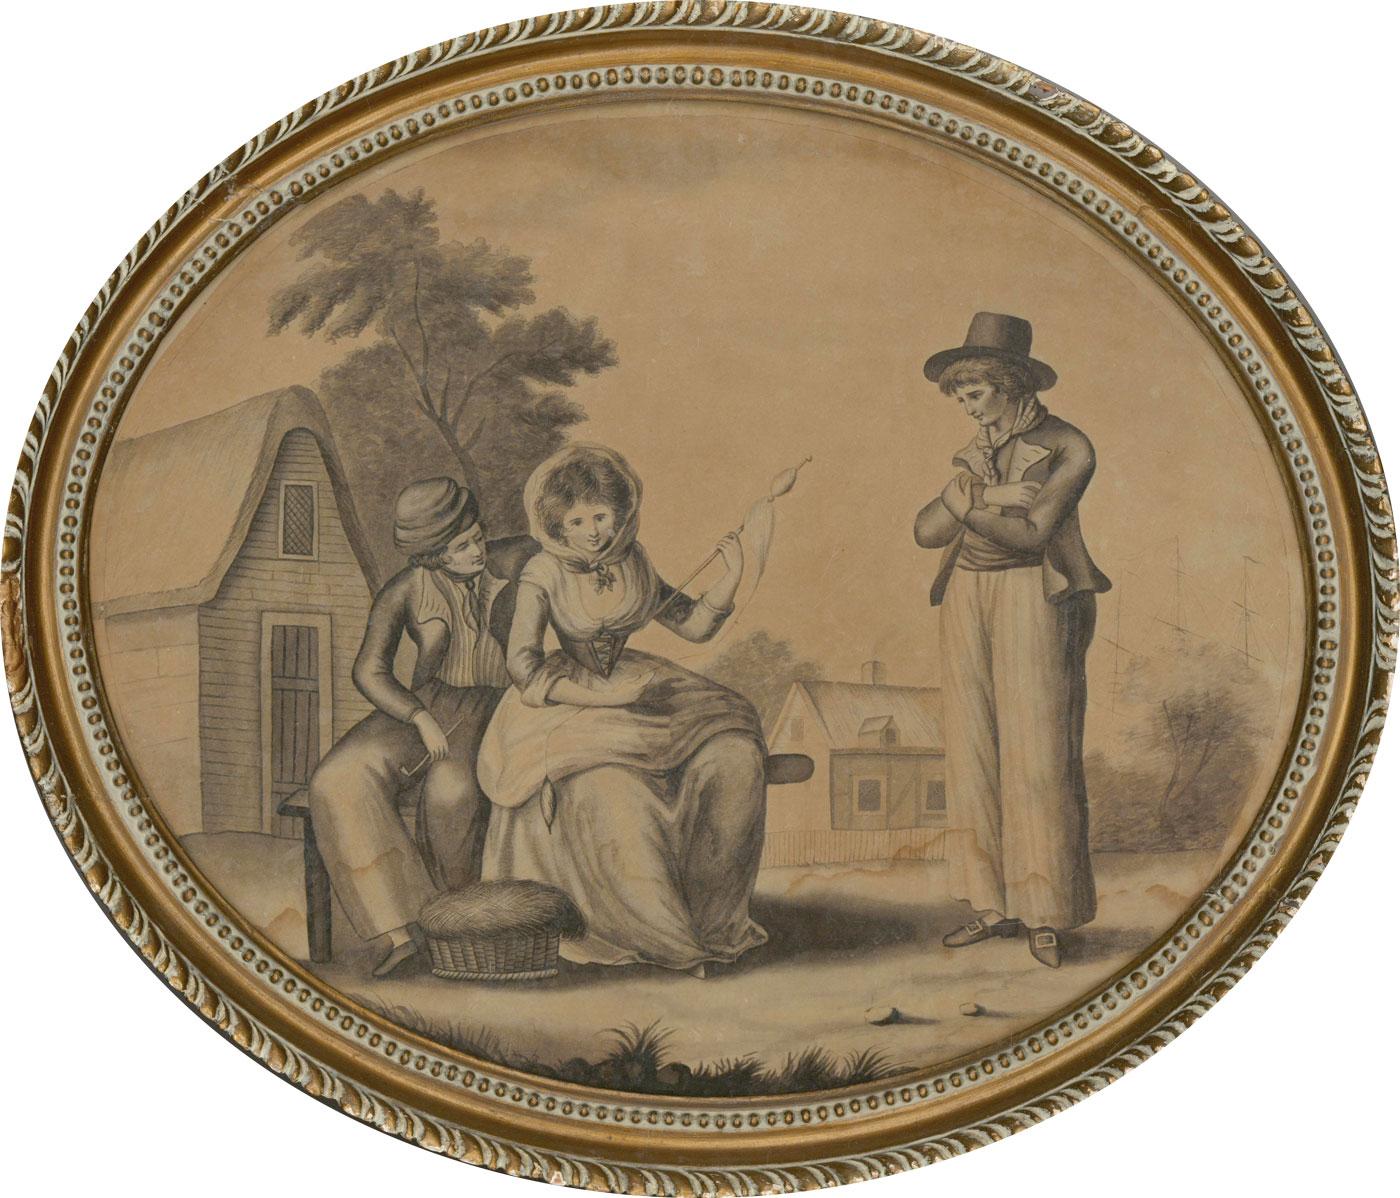 An English school grisaille watercolour painting depicting 3 figures with cottages in the background, and the masts of a ship peeking out above the trees to the right side. The painting is presented in an oval decorative gilt effect frame. 